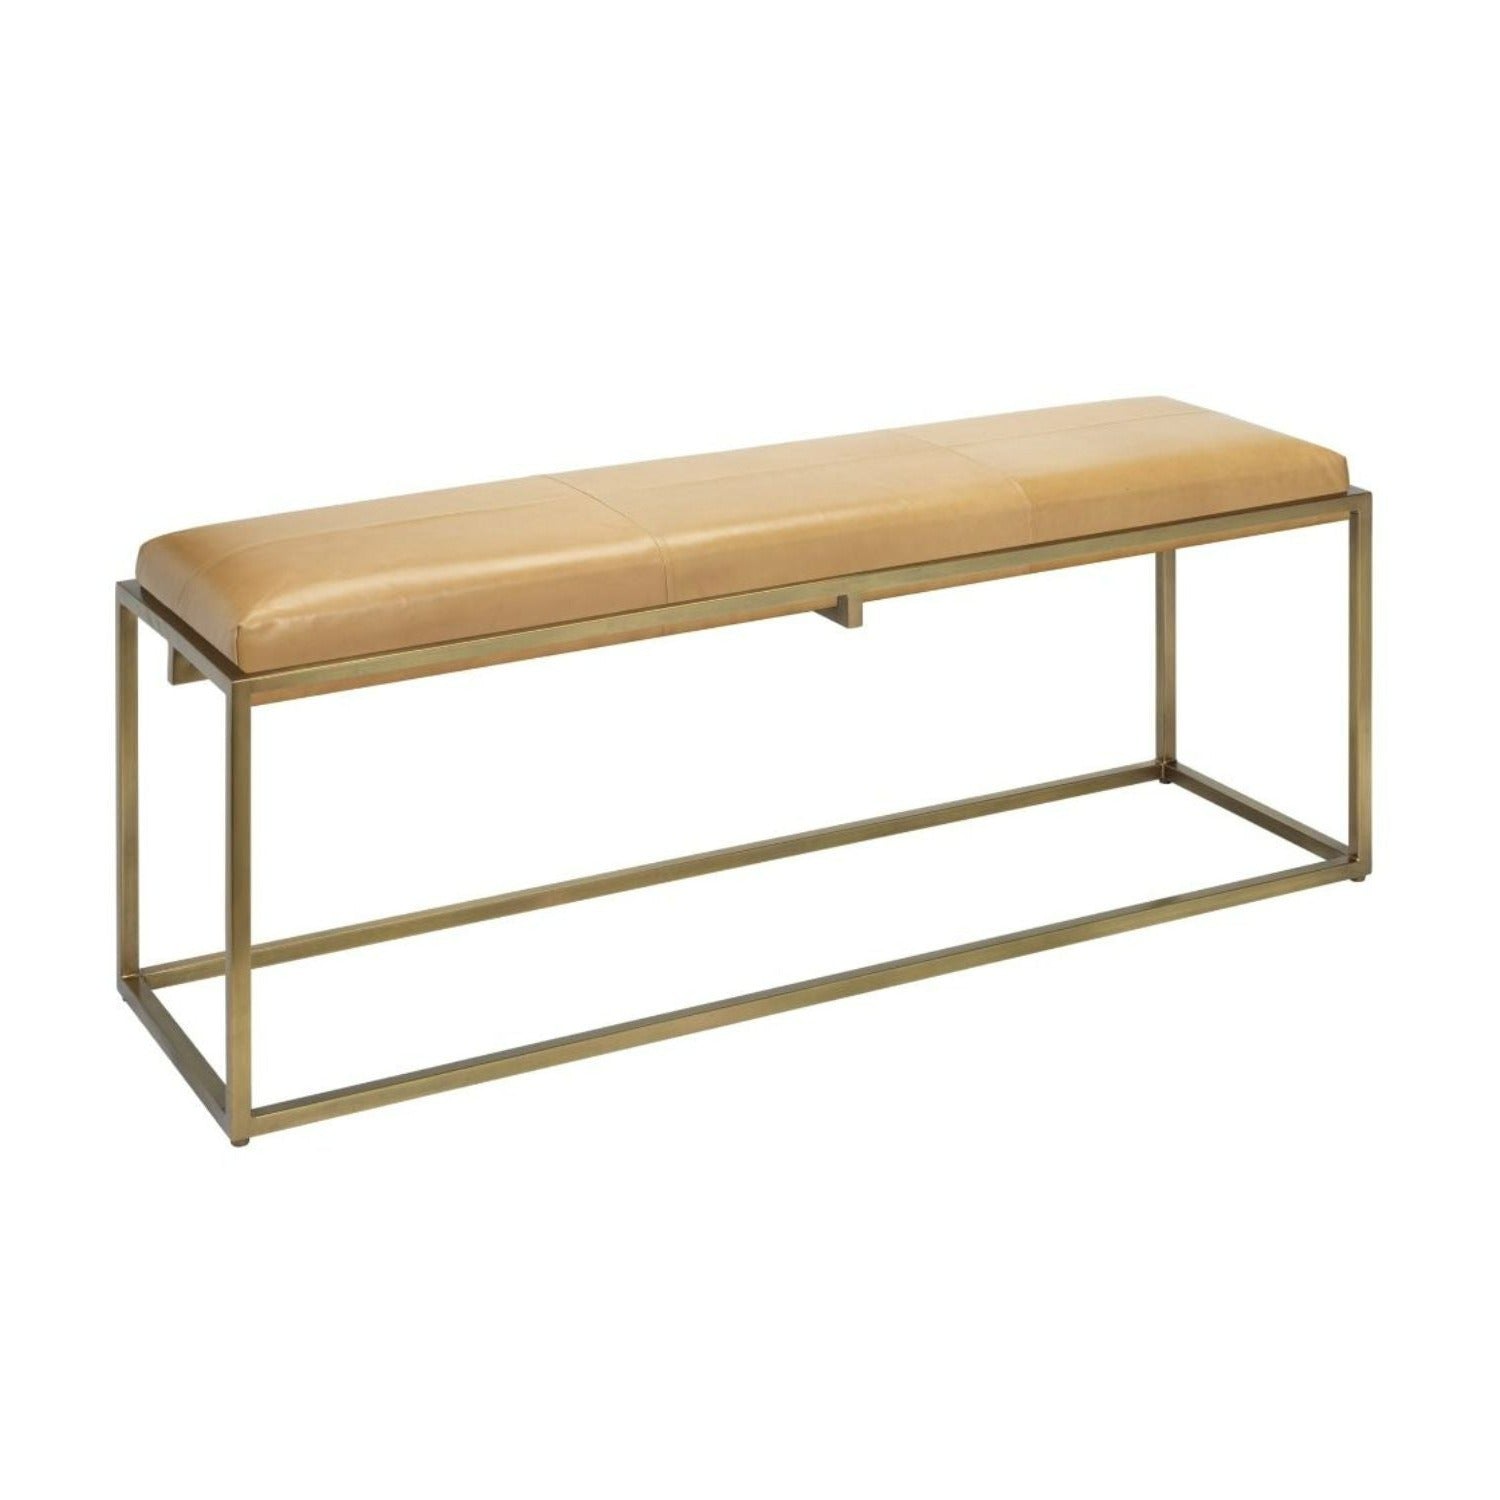 Shelby Hide Bench, Brown